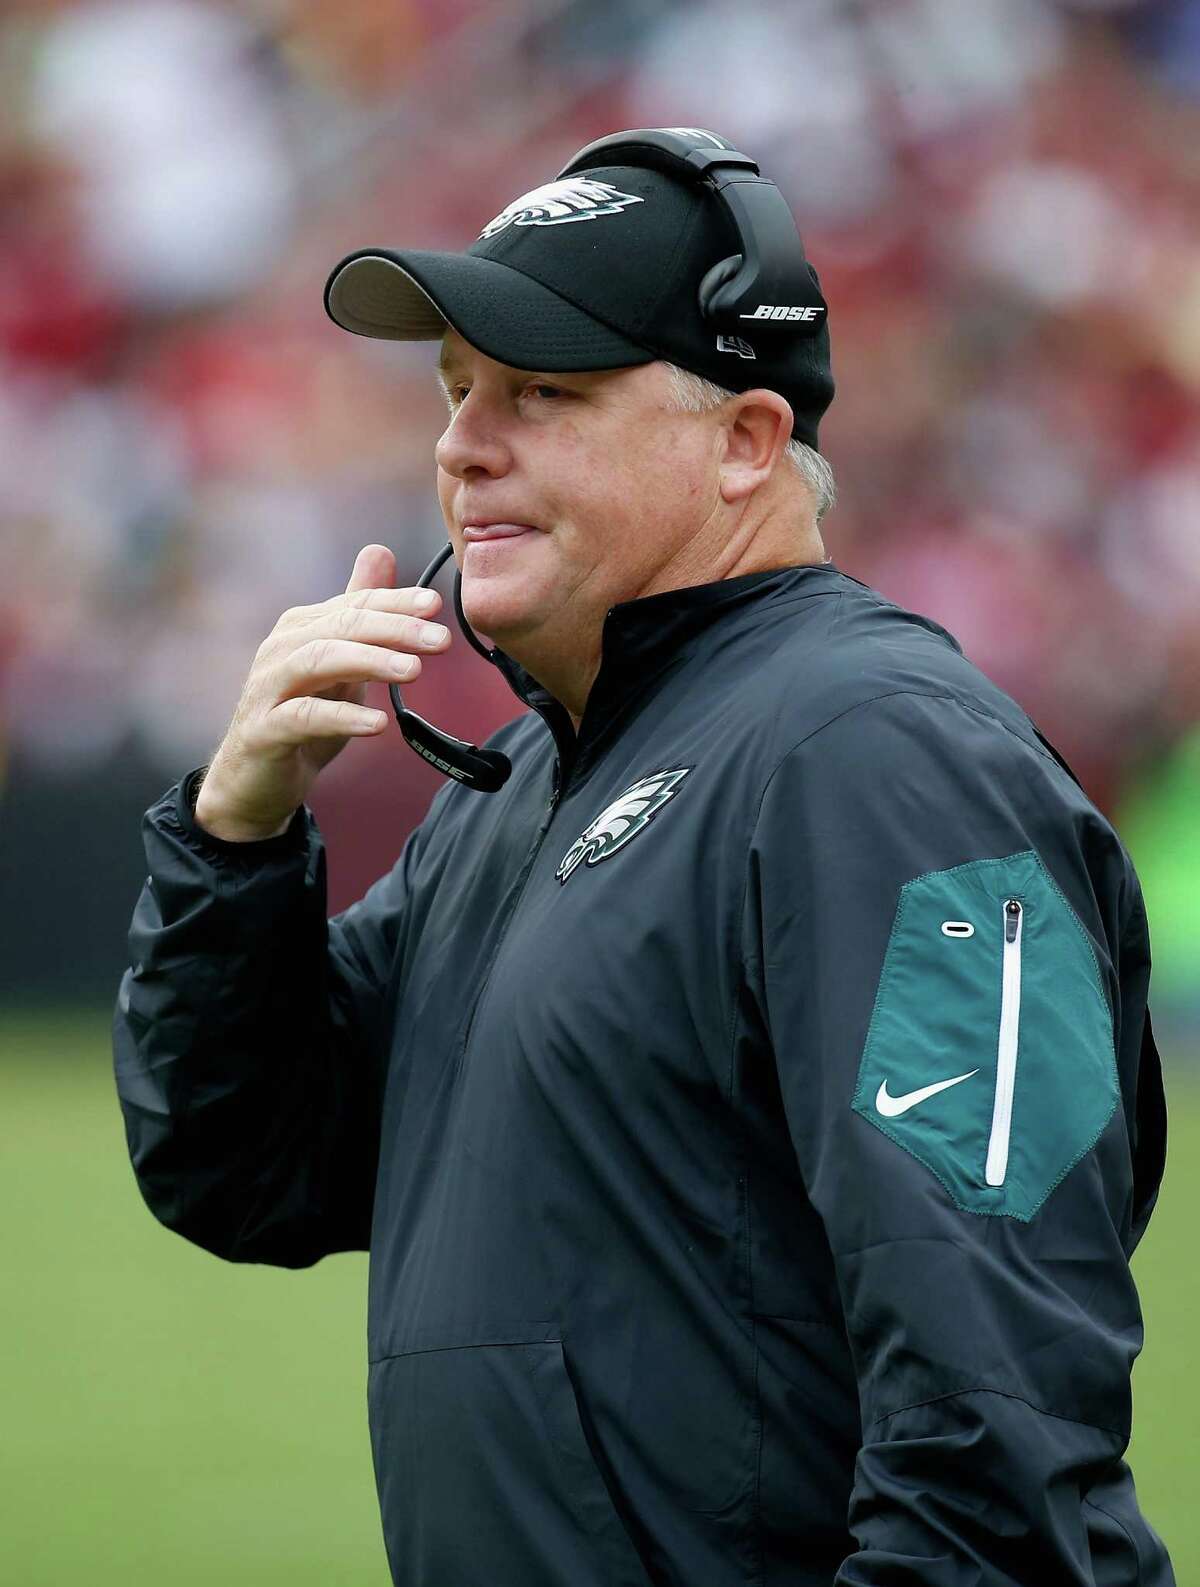 LANDOVER, MD - OCTOBER 04: Head coach Chip Kelly of the Philadelphia Eagles looks on during the second half of the Eagles 23-20 loss to the Washington Redskins at FedExField on October 4, 2015 in Landover, Maryland. (Photo by Rob Carr/Getty Images) ORG XMIT: 570355381